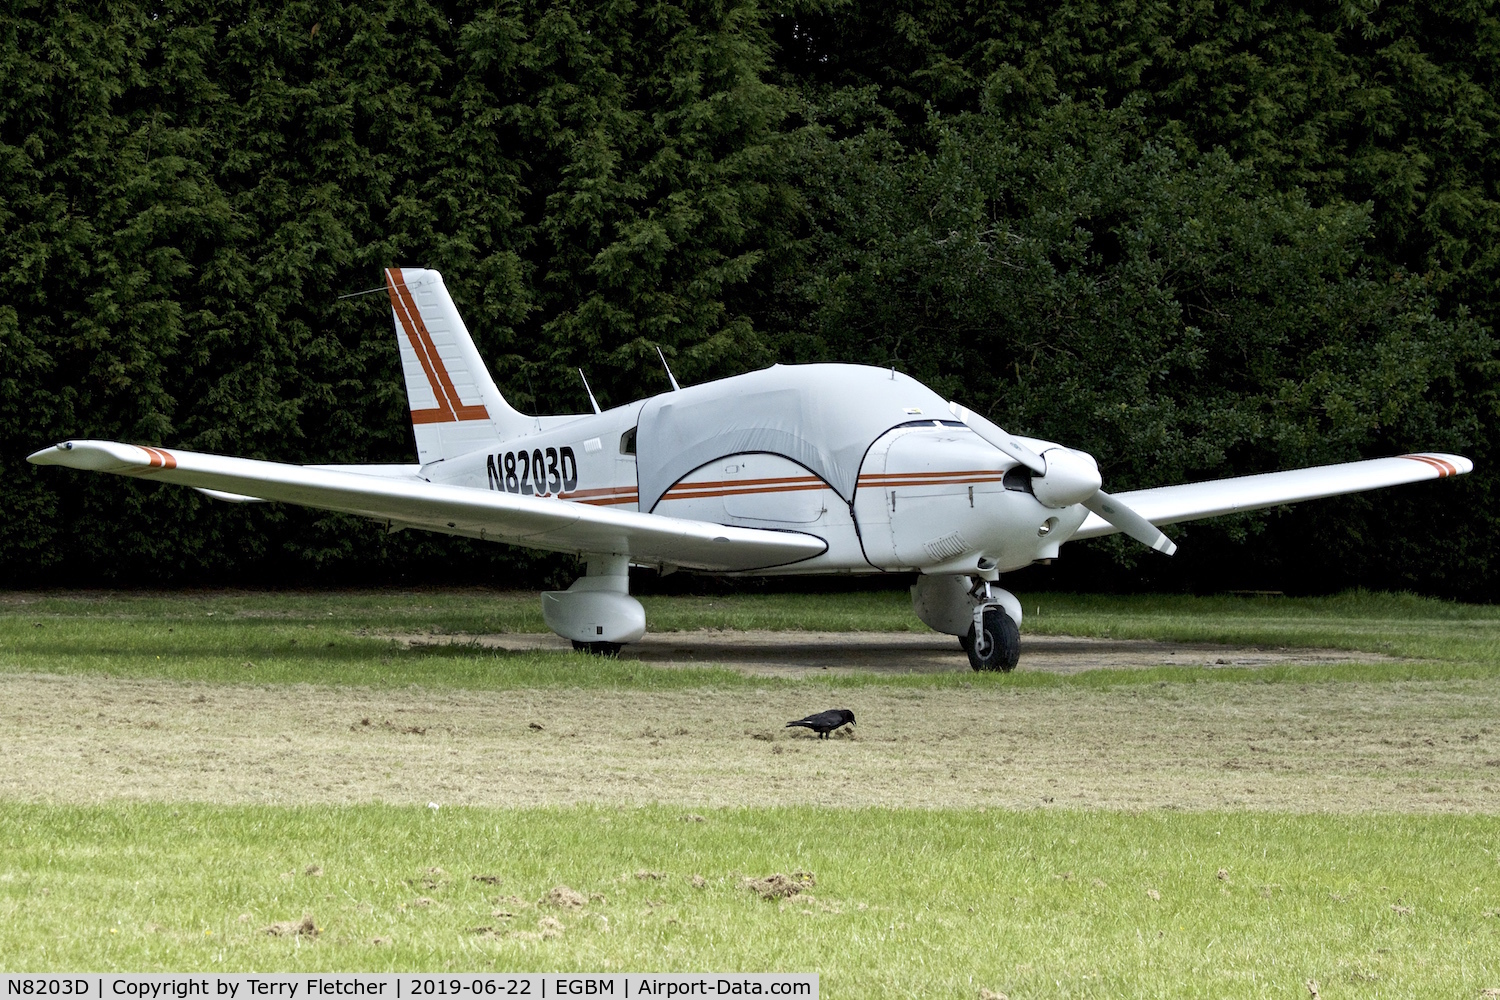 N8203D, 1982 Piper PA-28-181 C/N 28-8290120, At Tatenhill Airfield in the UK